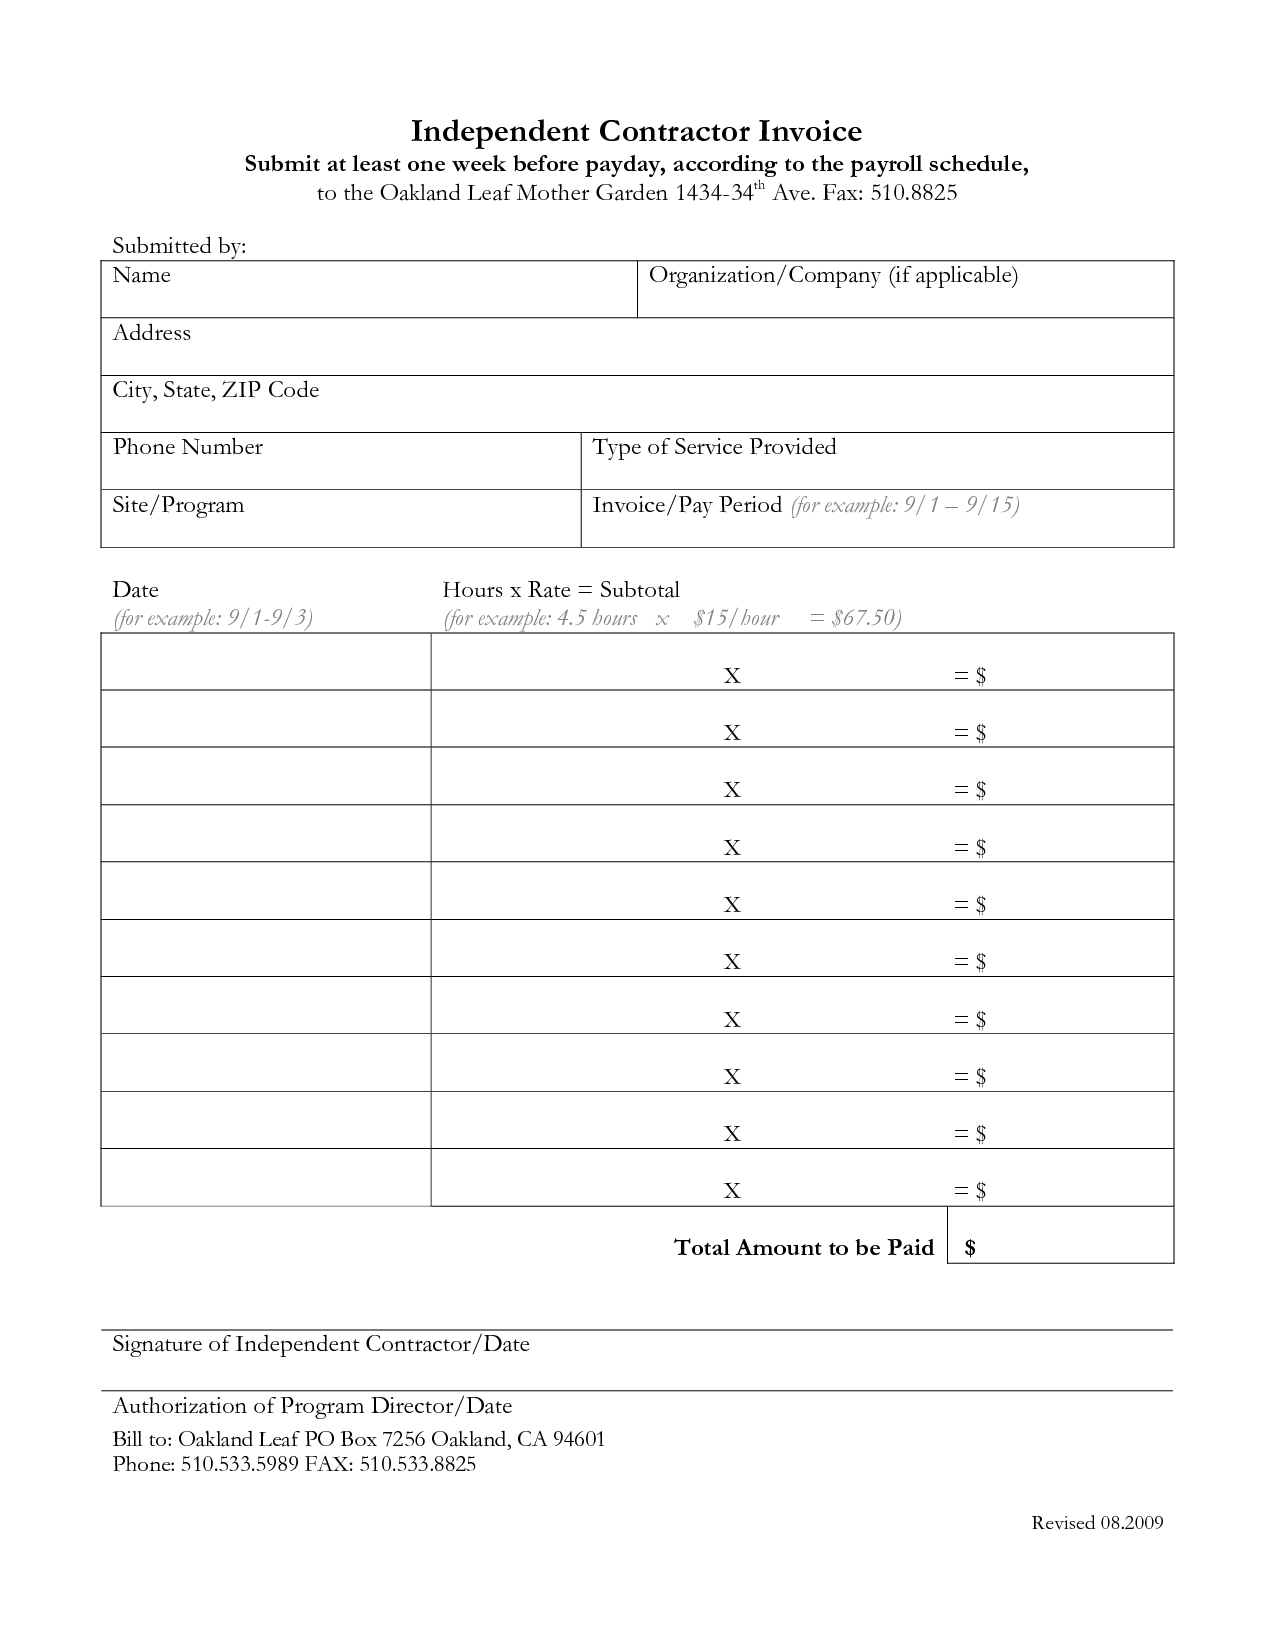 Independent Contractor Invoice Template Free | invoice example